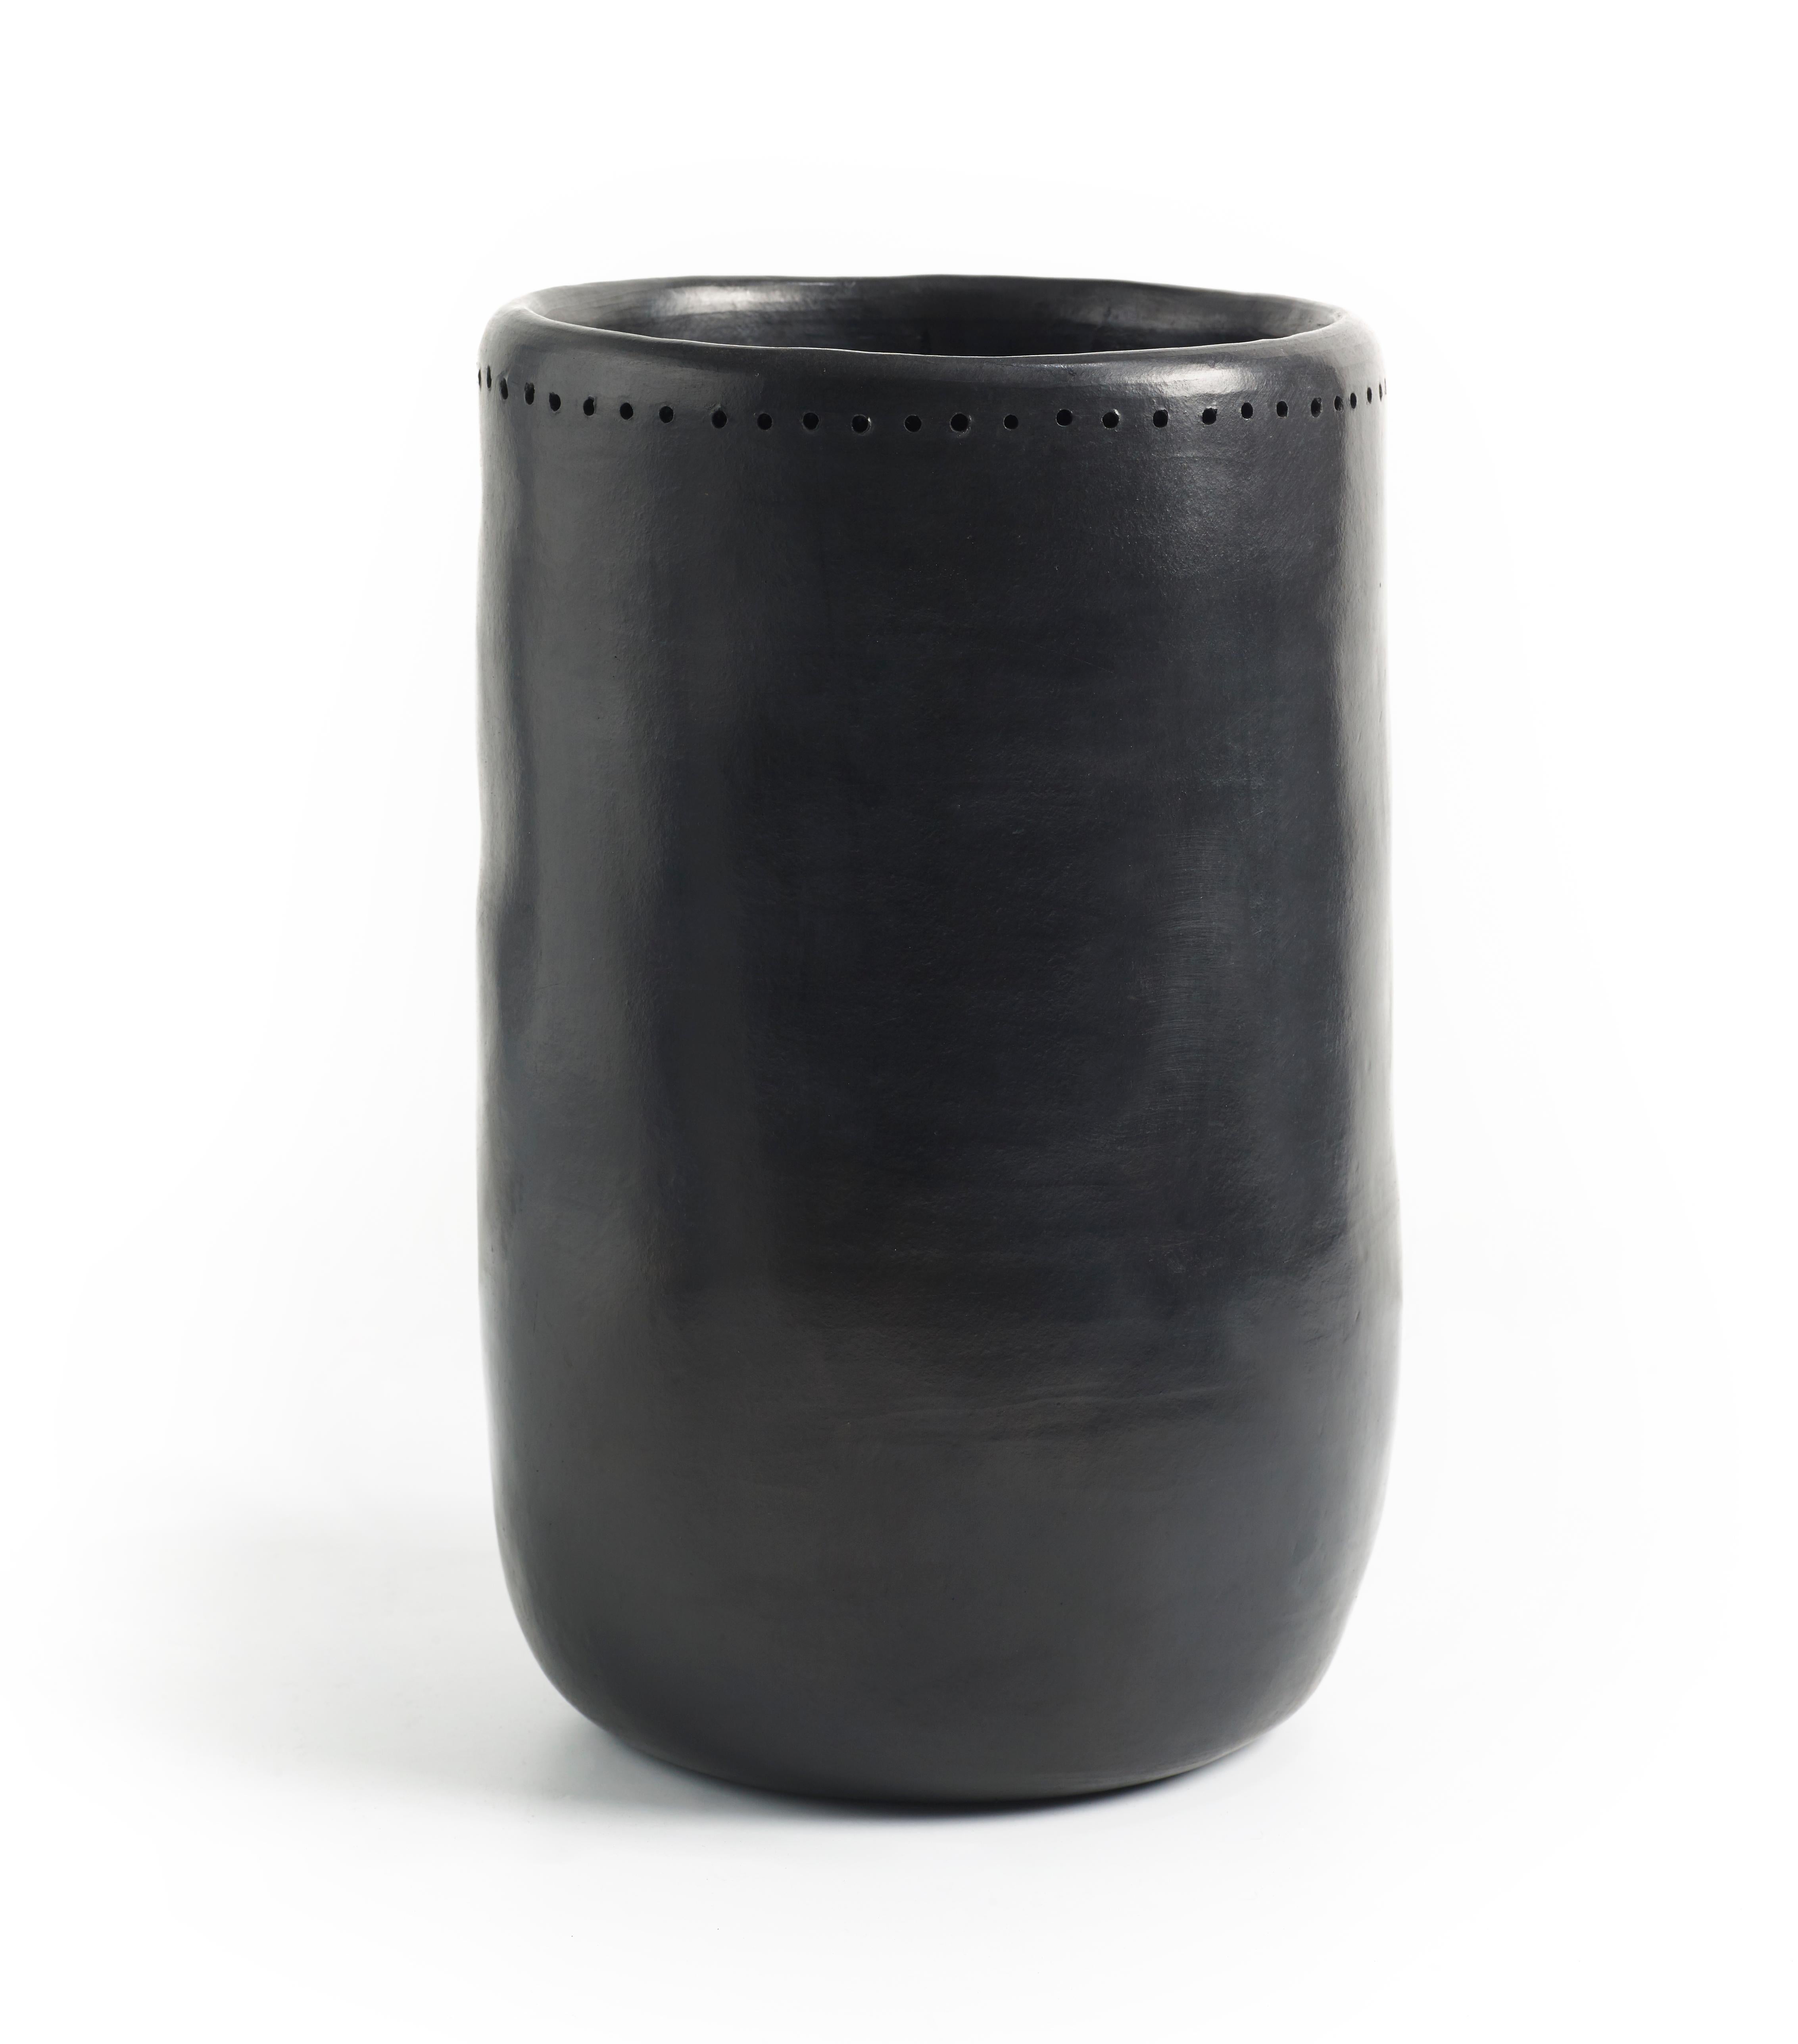 Vase 2 barro dining by Sebastian Herkner
Materials: Heat-resistant black ceramic. 
Technique: Glazed. Oven cooked and polished with semi-precious stones. 
Dimensions: Diameter 16 cm x height 27 cm 
Available in size small. 

This vase belongs to the